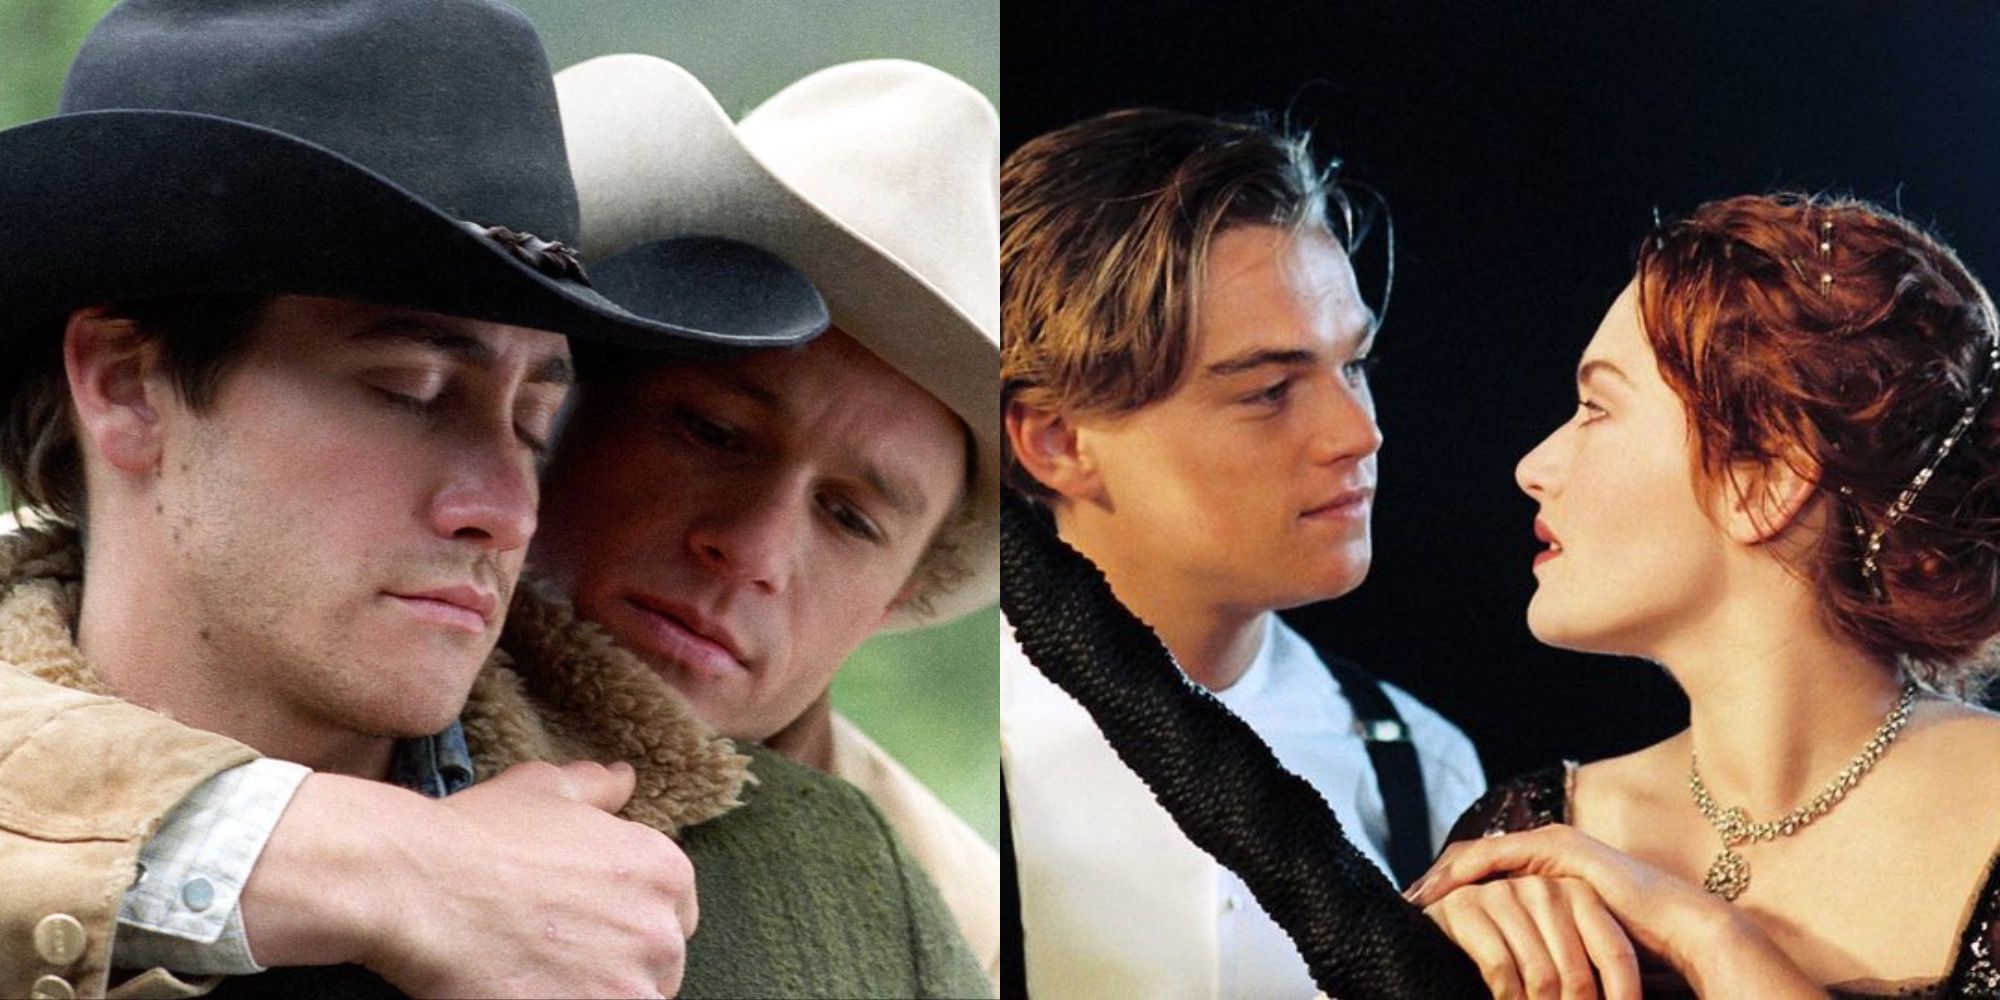 Split Image of Brokeback Mountain’s Jack and Ennis Lovingly Holding Each Other And Titanic’s Jack And Rose Looking Lovingly Into Each Other’s Eyes.